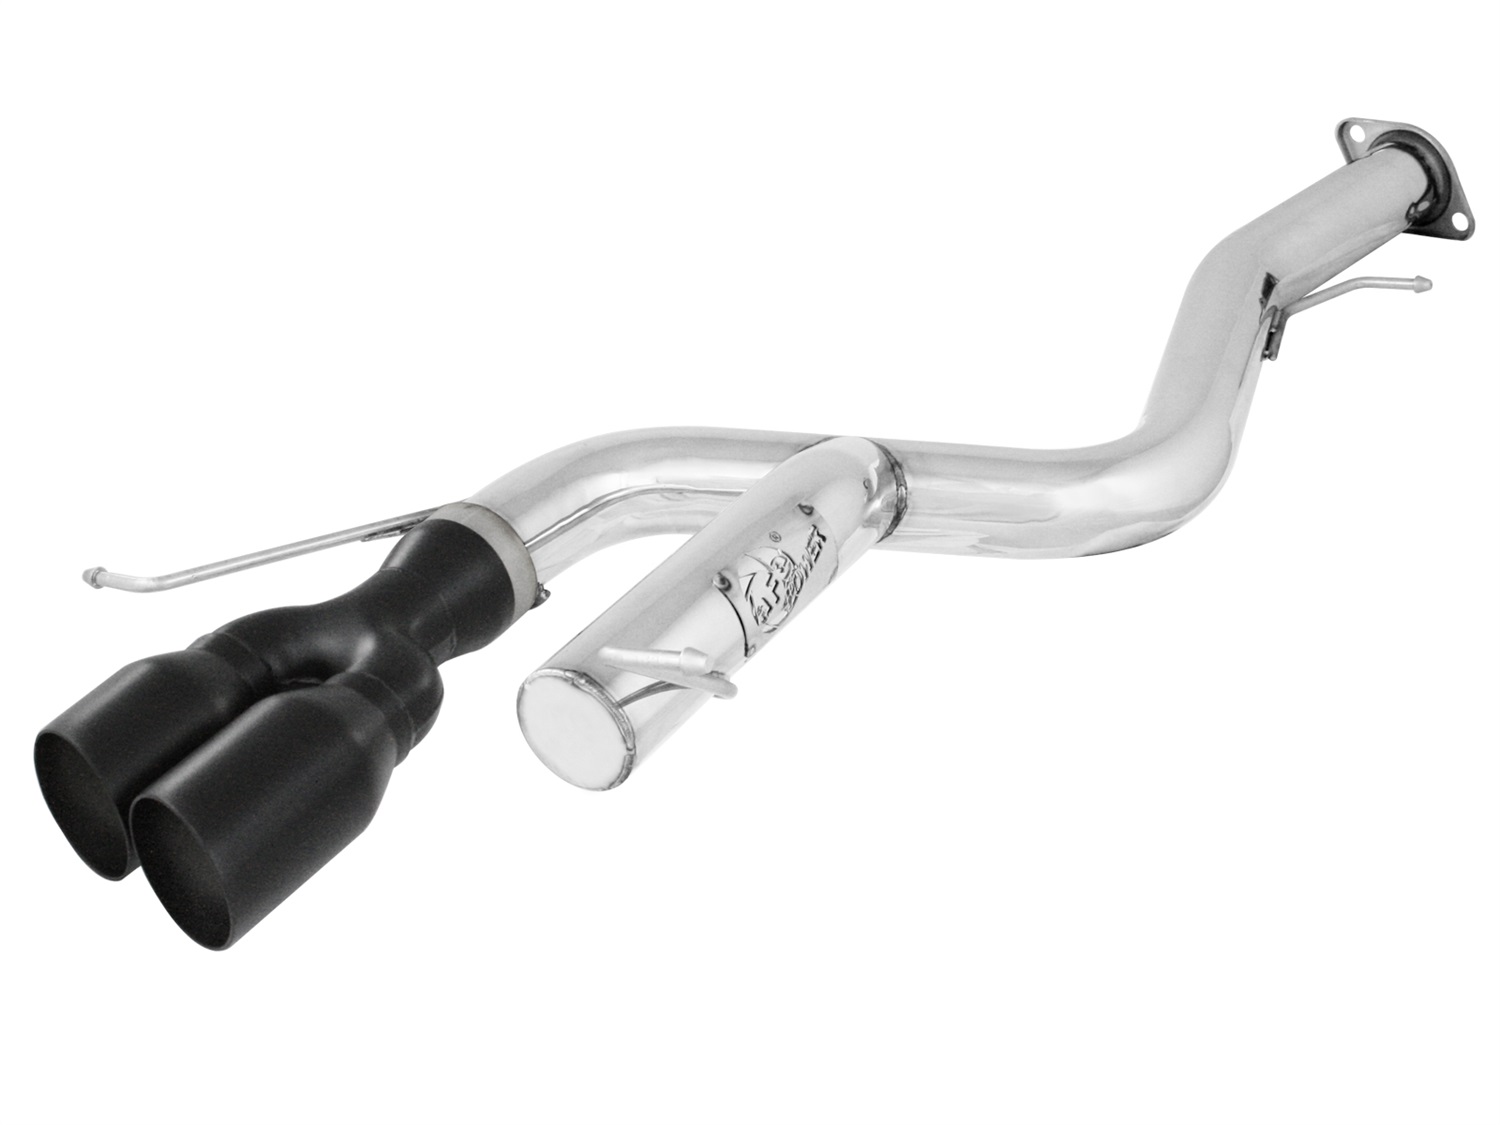 aFe Power aFe Power 49-36302-B MACHForce XP Cat-Back Exhaust System Fits 08-12 135i